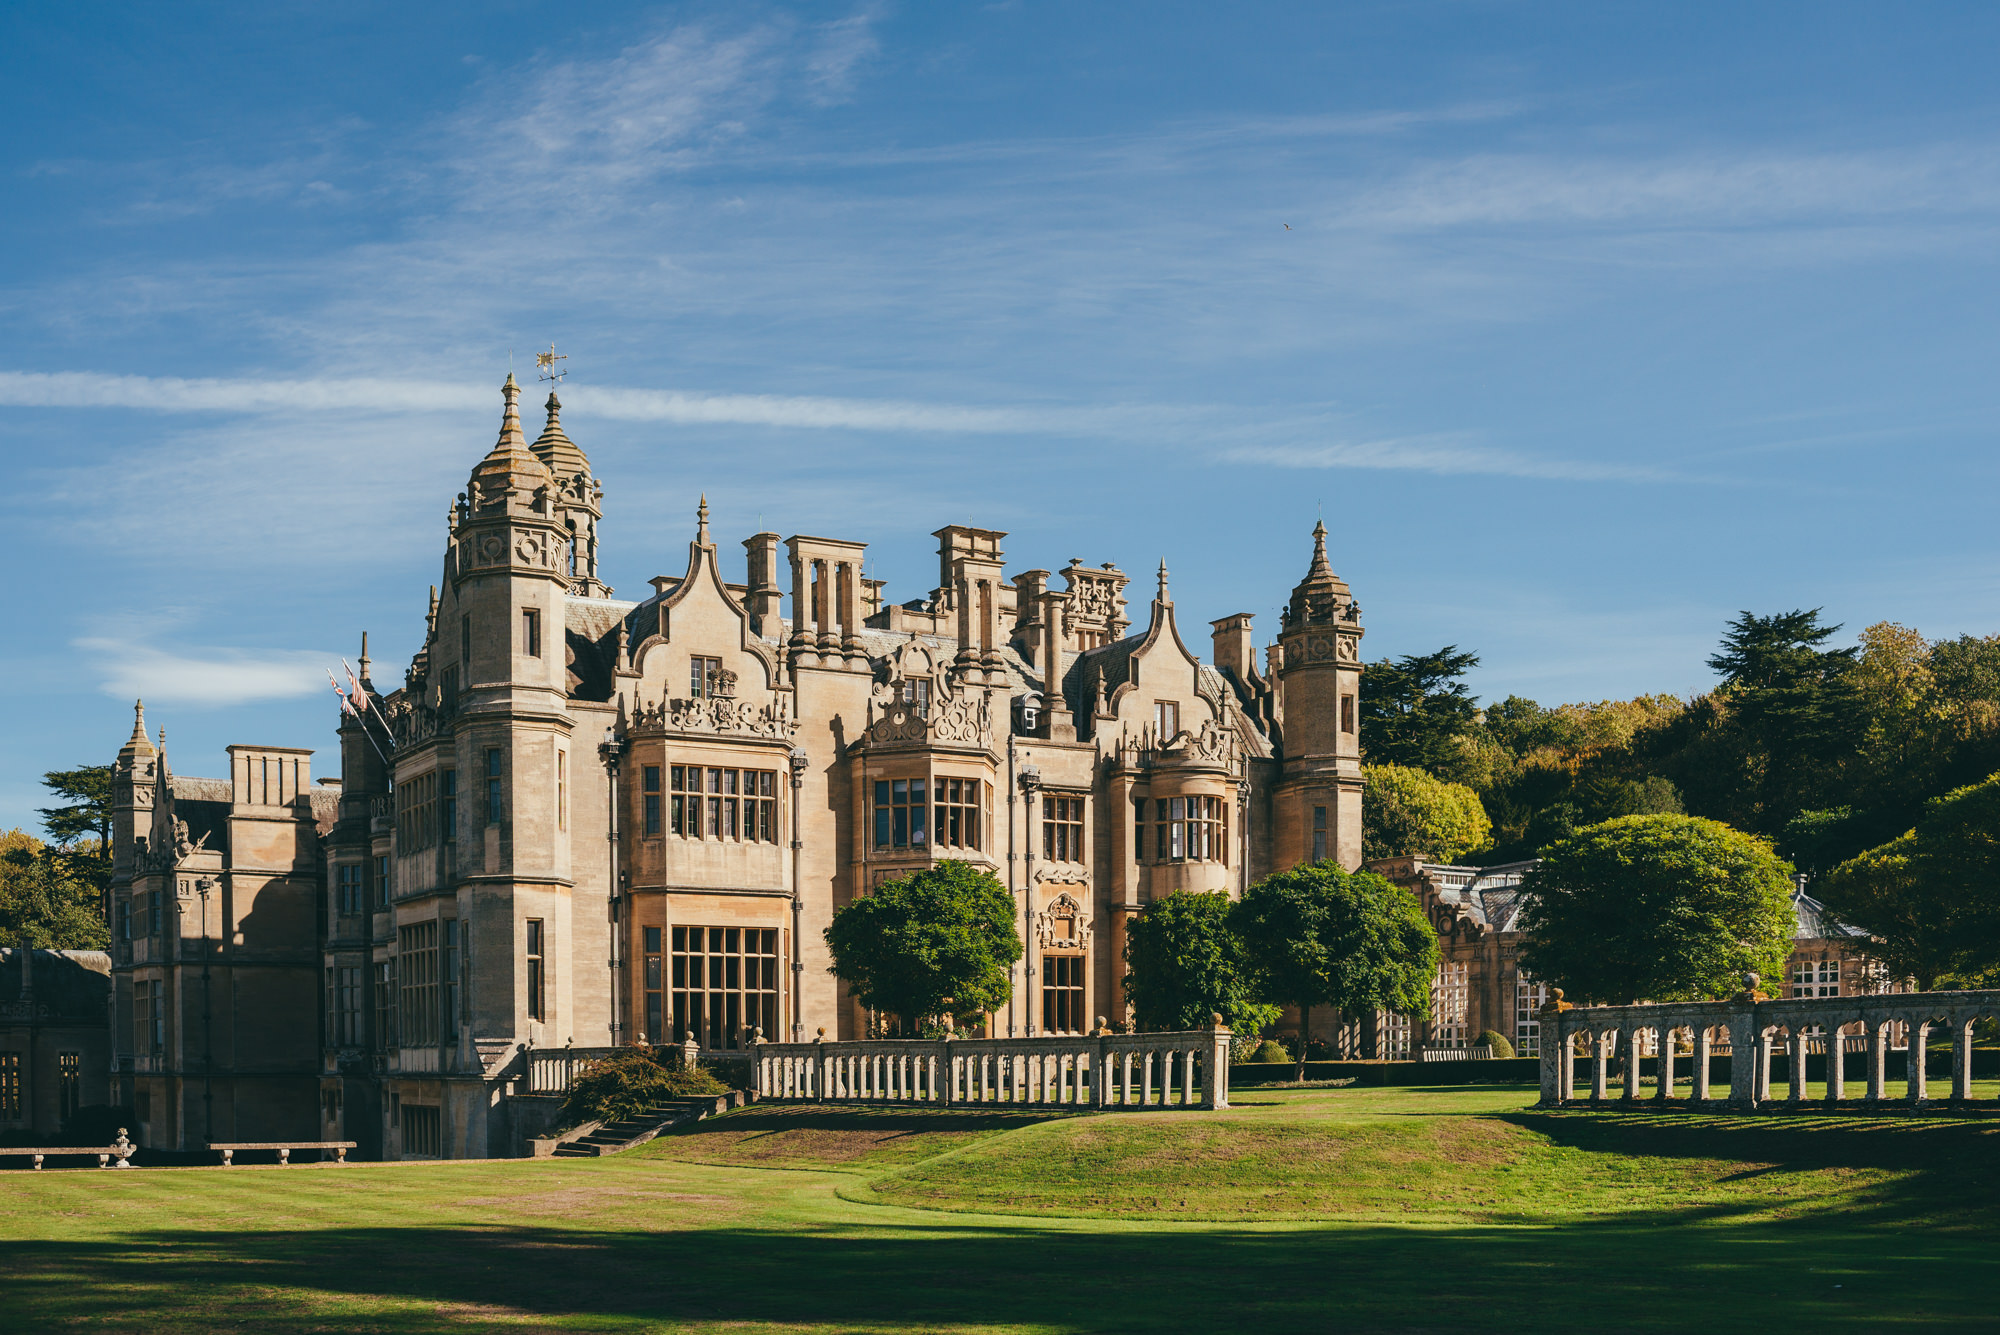 Rear view of harlaxton manor in the sunshine